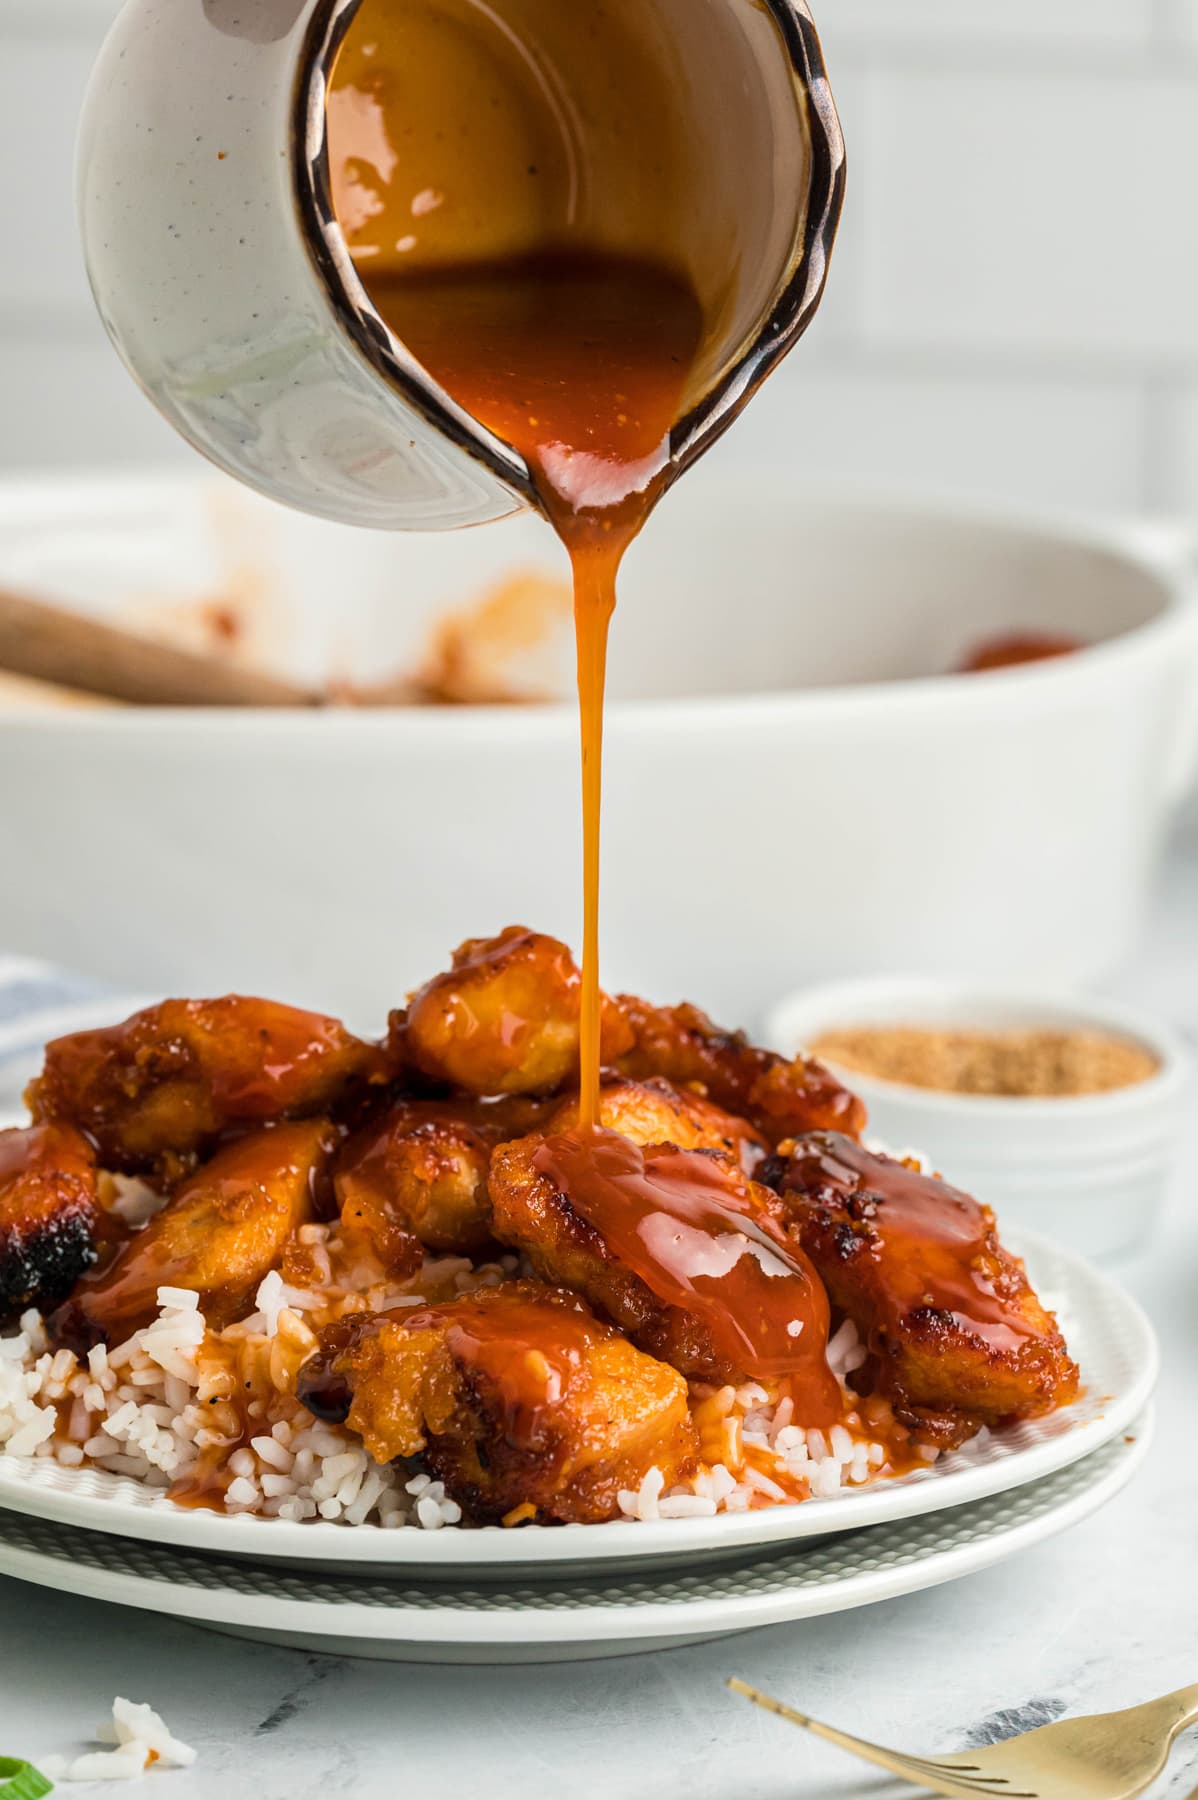 Sweet and sour sauce being drizzled over a plate of chicken and rice